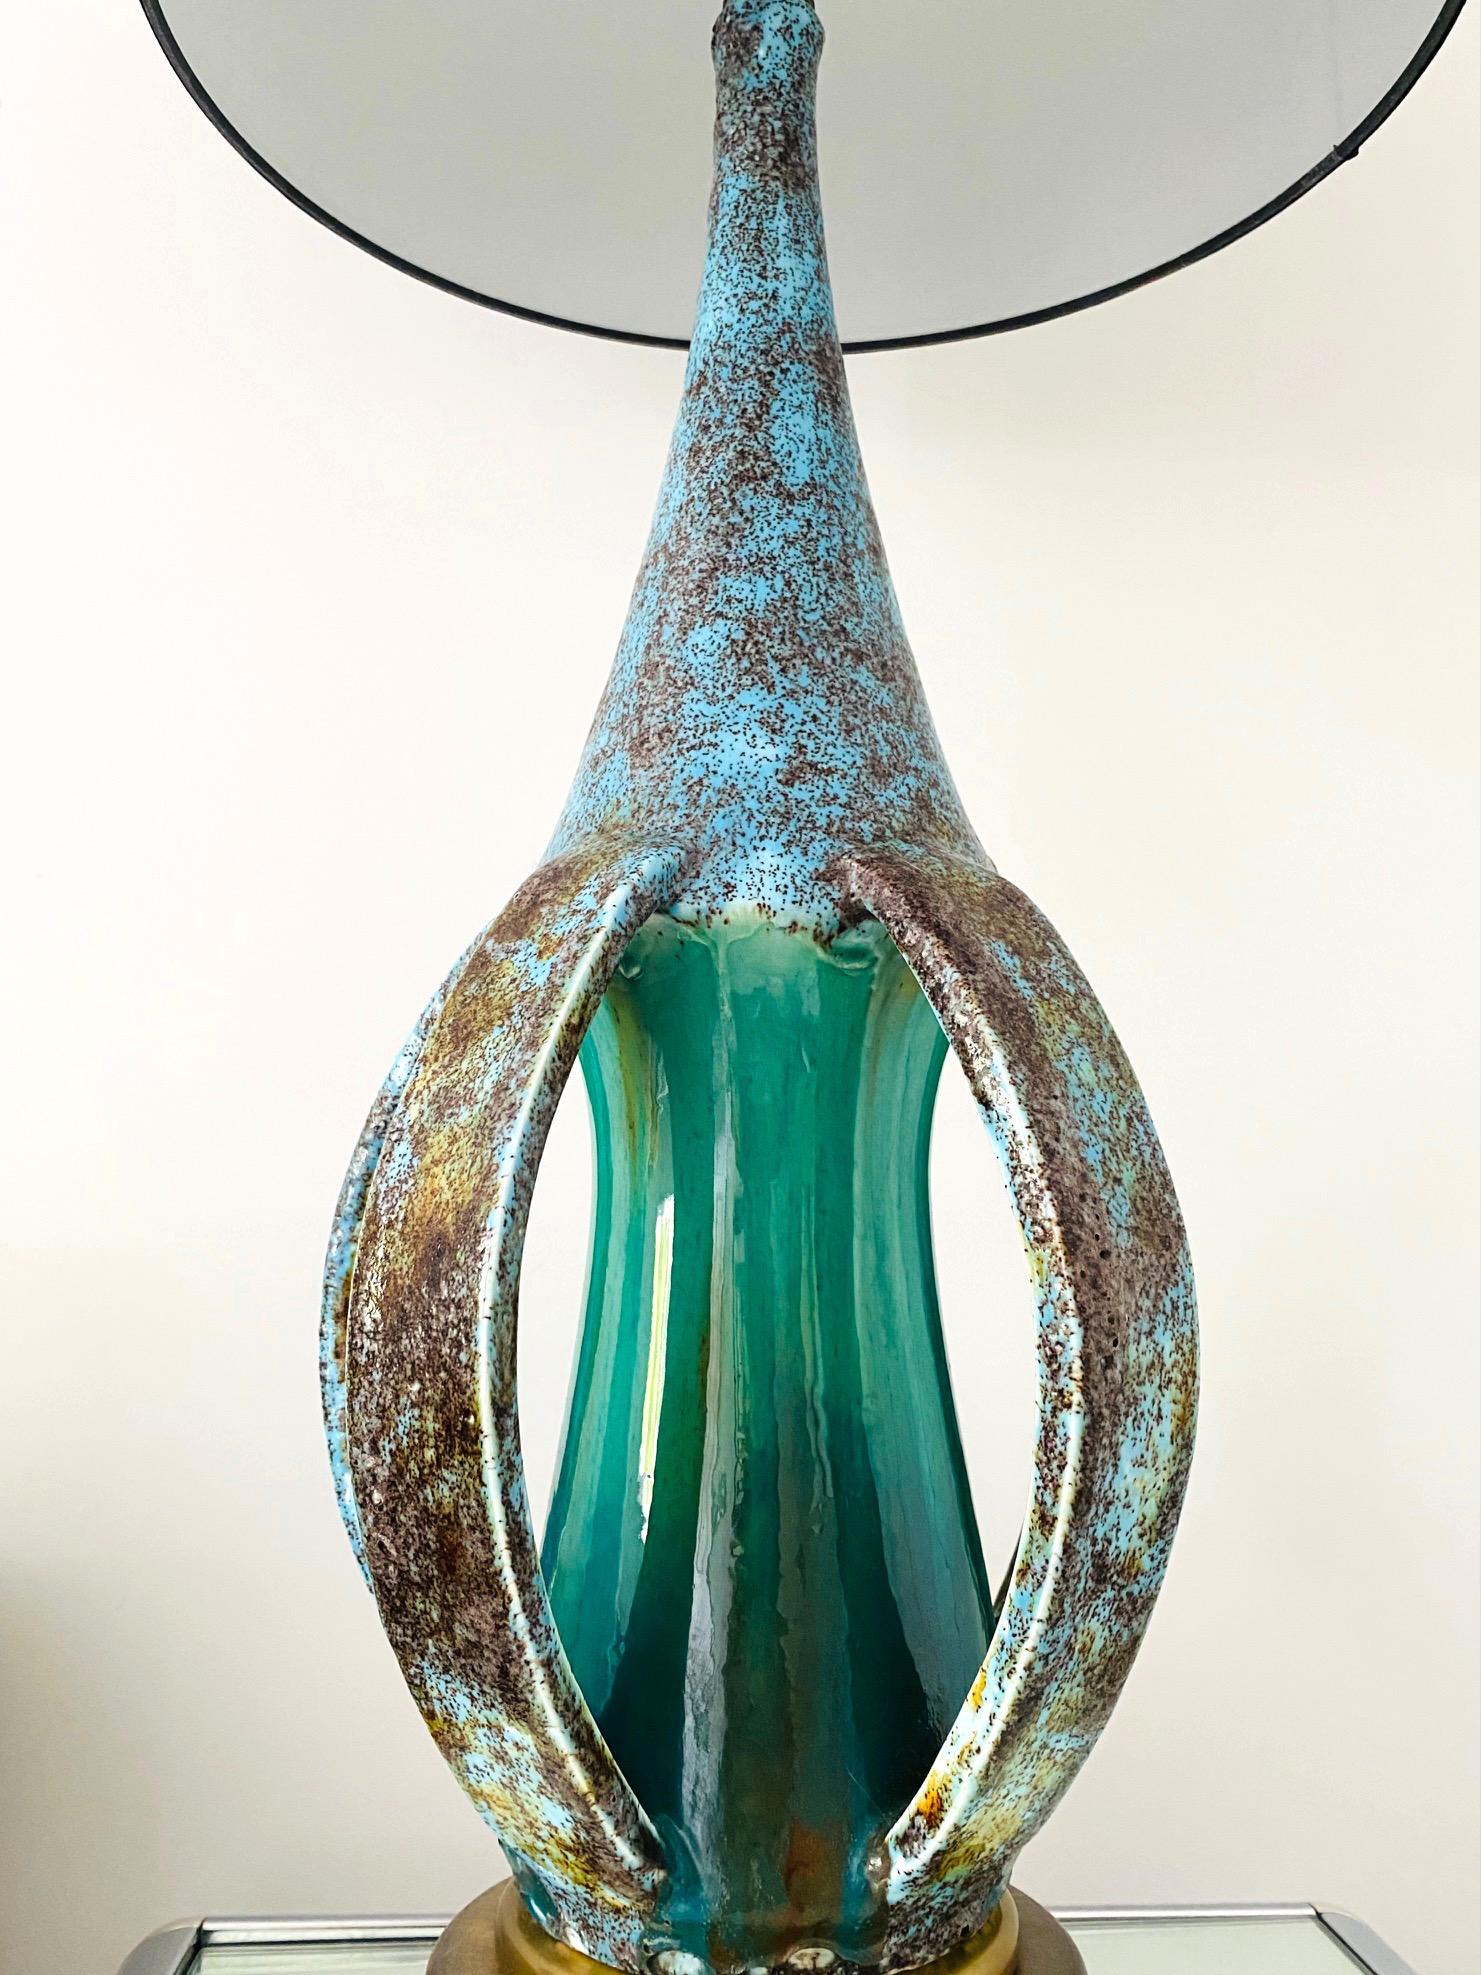 Glazed Mid-Century Modern Sculptural Pottery Lamp in Turquoise & Blue, Denmark C. 1960s For Sale